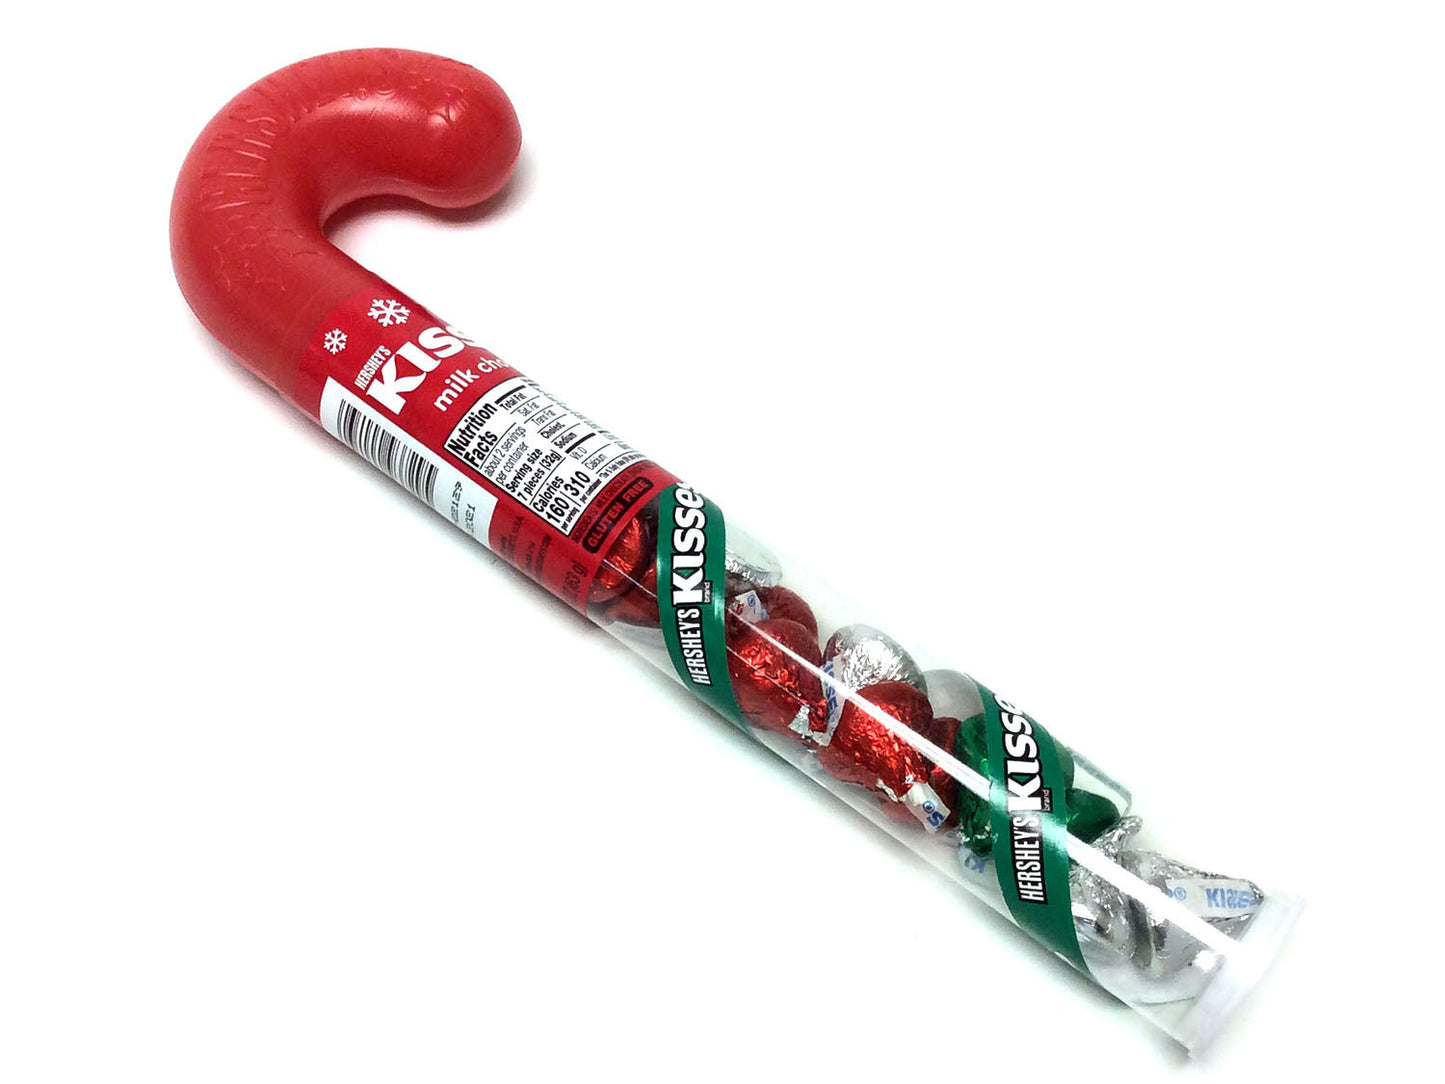 Candy Cane with Hershey's Christmas Kisses - 2.24 oz  11 inch